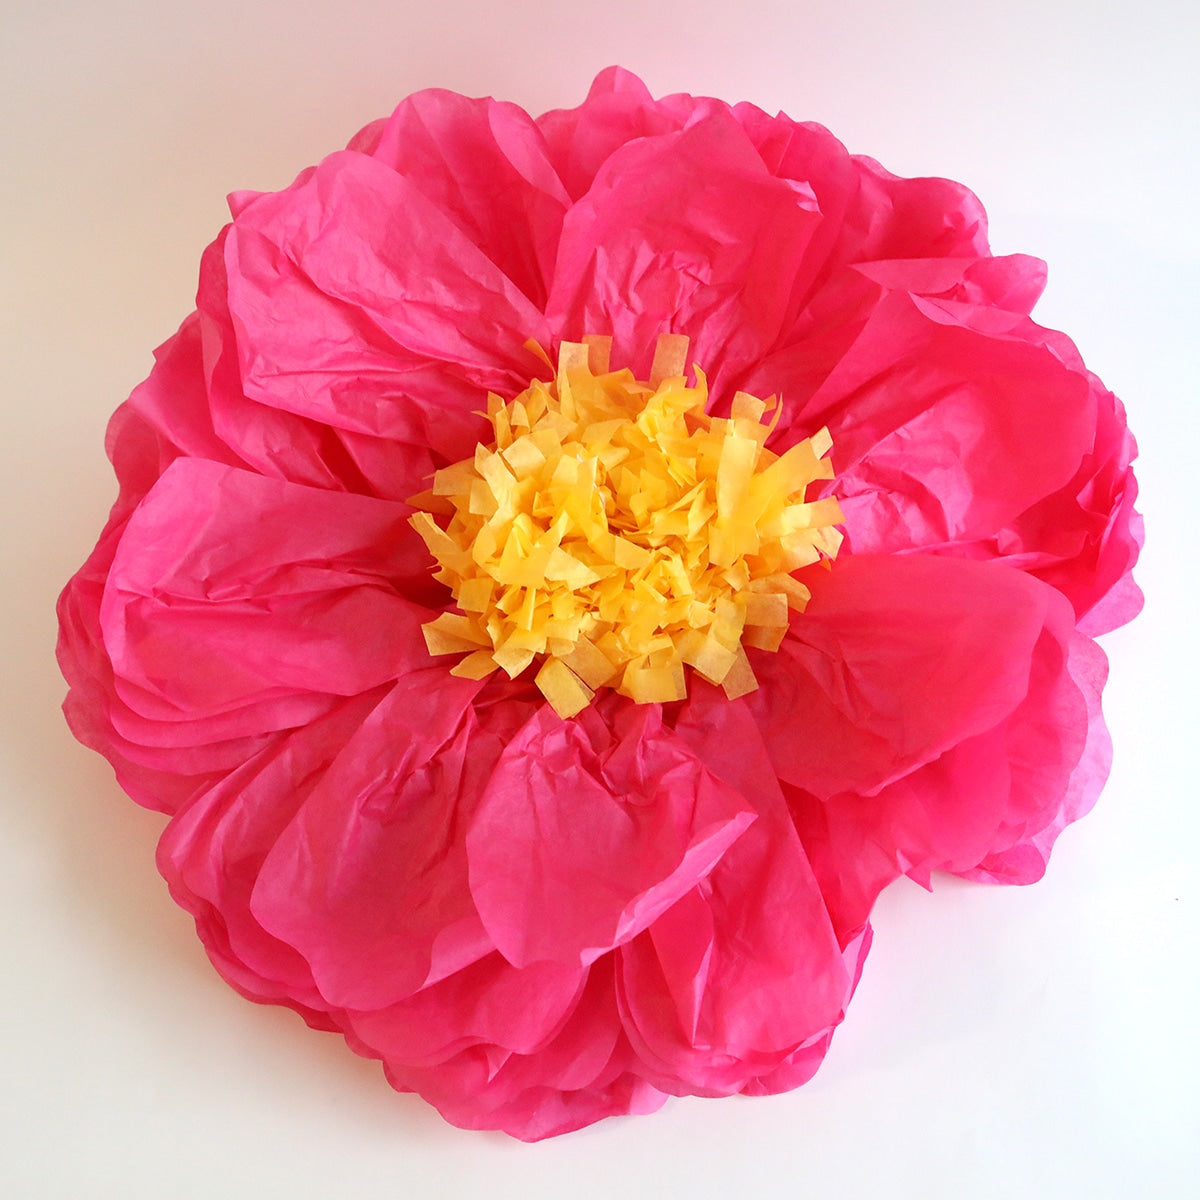 a large pink flower with yellow center on a white background.